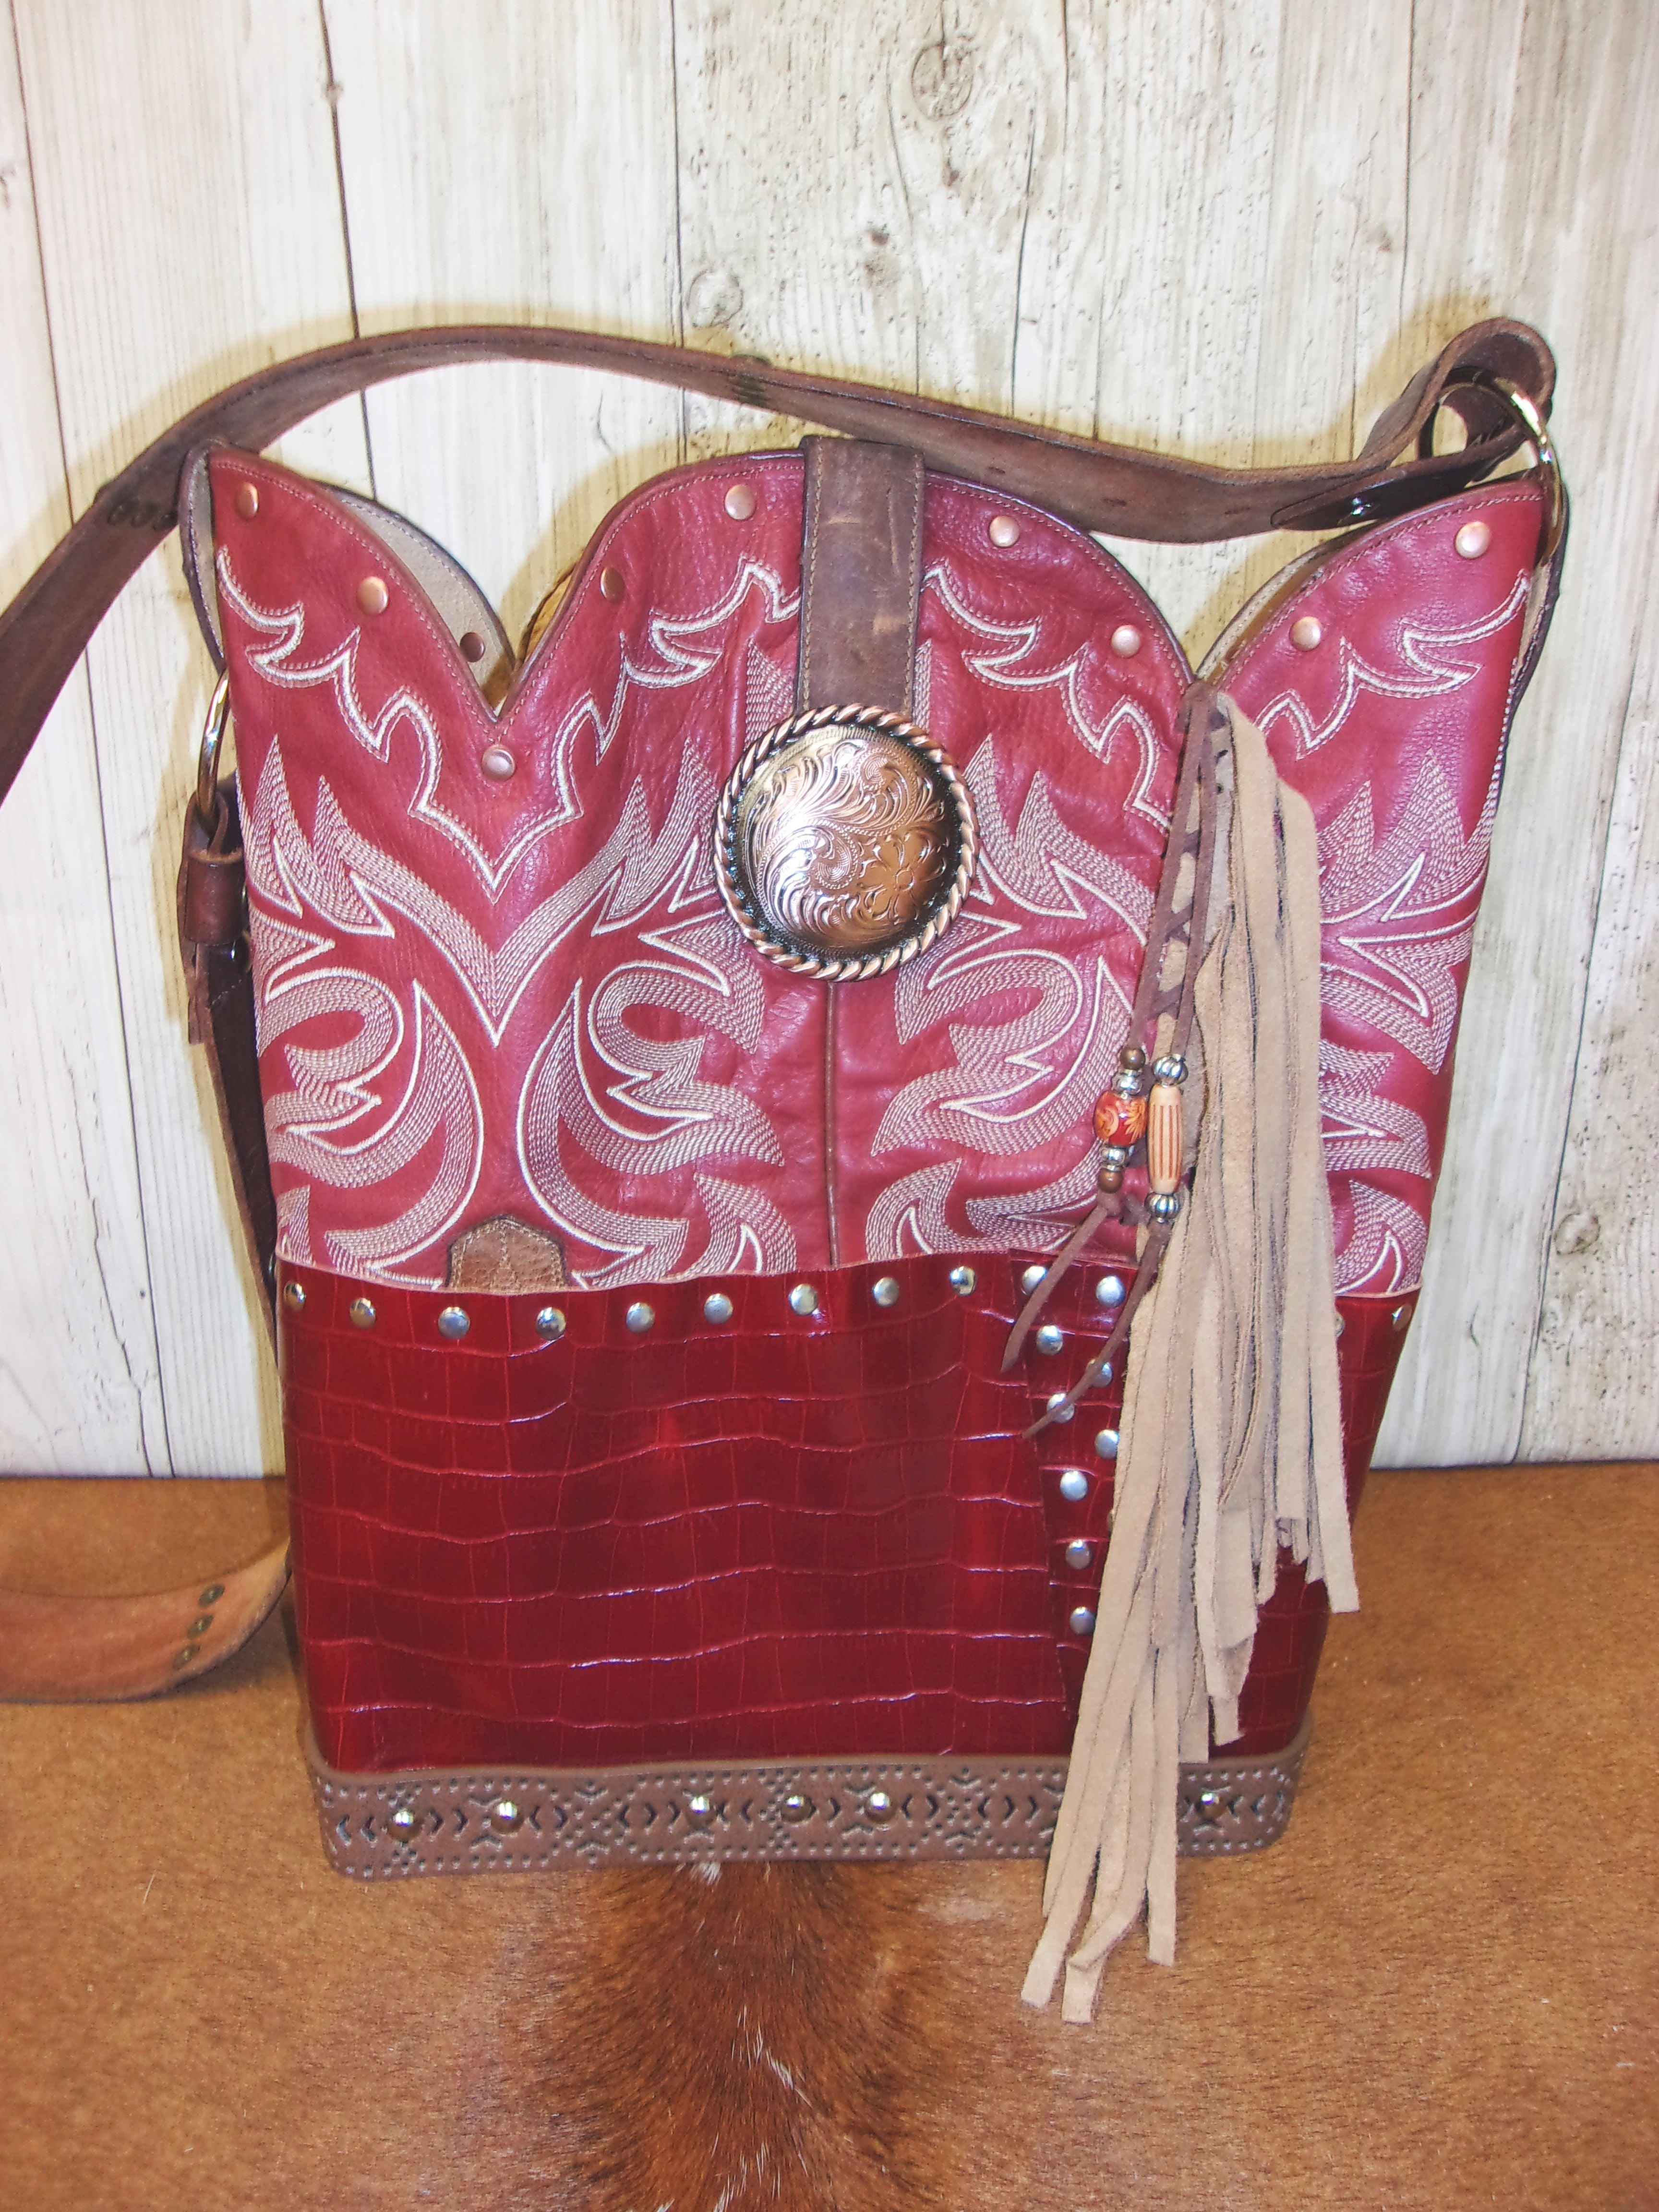 Leather Purse with Fringe - Cowboy Boot Purse with Fringe - Western Shoulder Bag with Fringe TS311 cowboy boot purses, western fringe purse, handmade leather purses, boot purse, handmade western purse, custom leather handbags Chris Thompson Bags